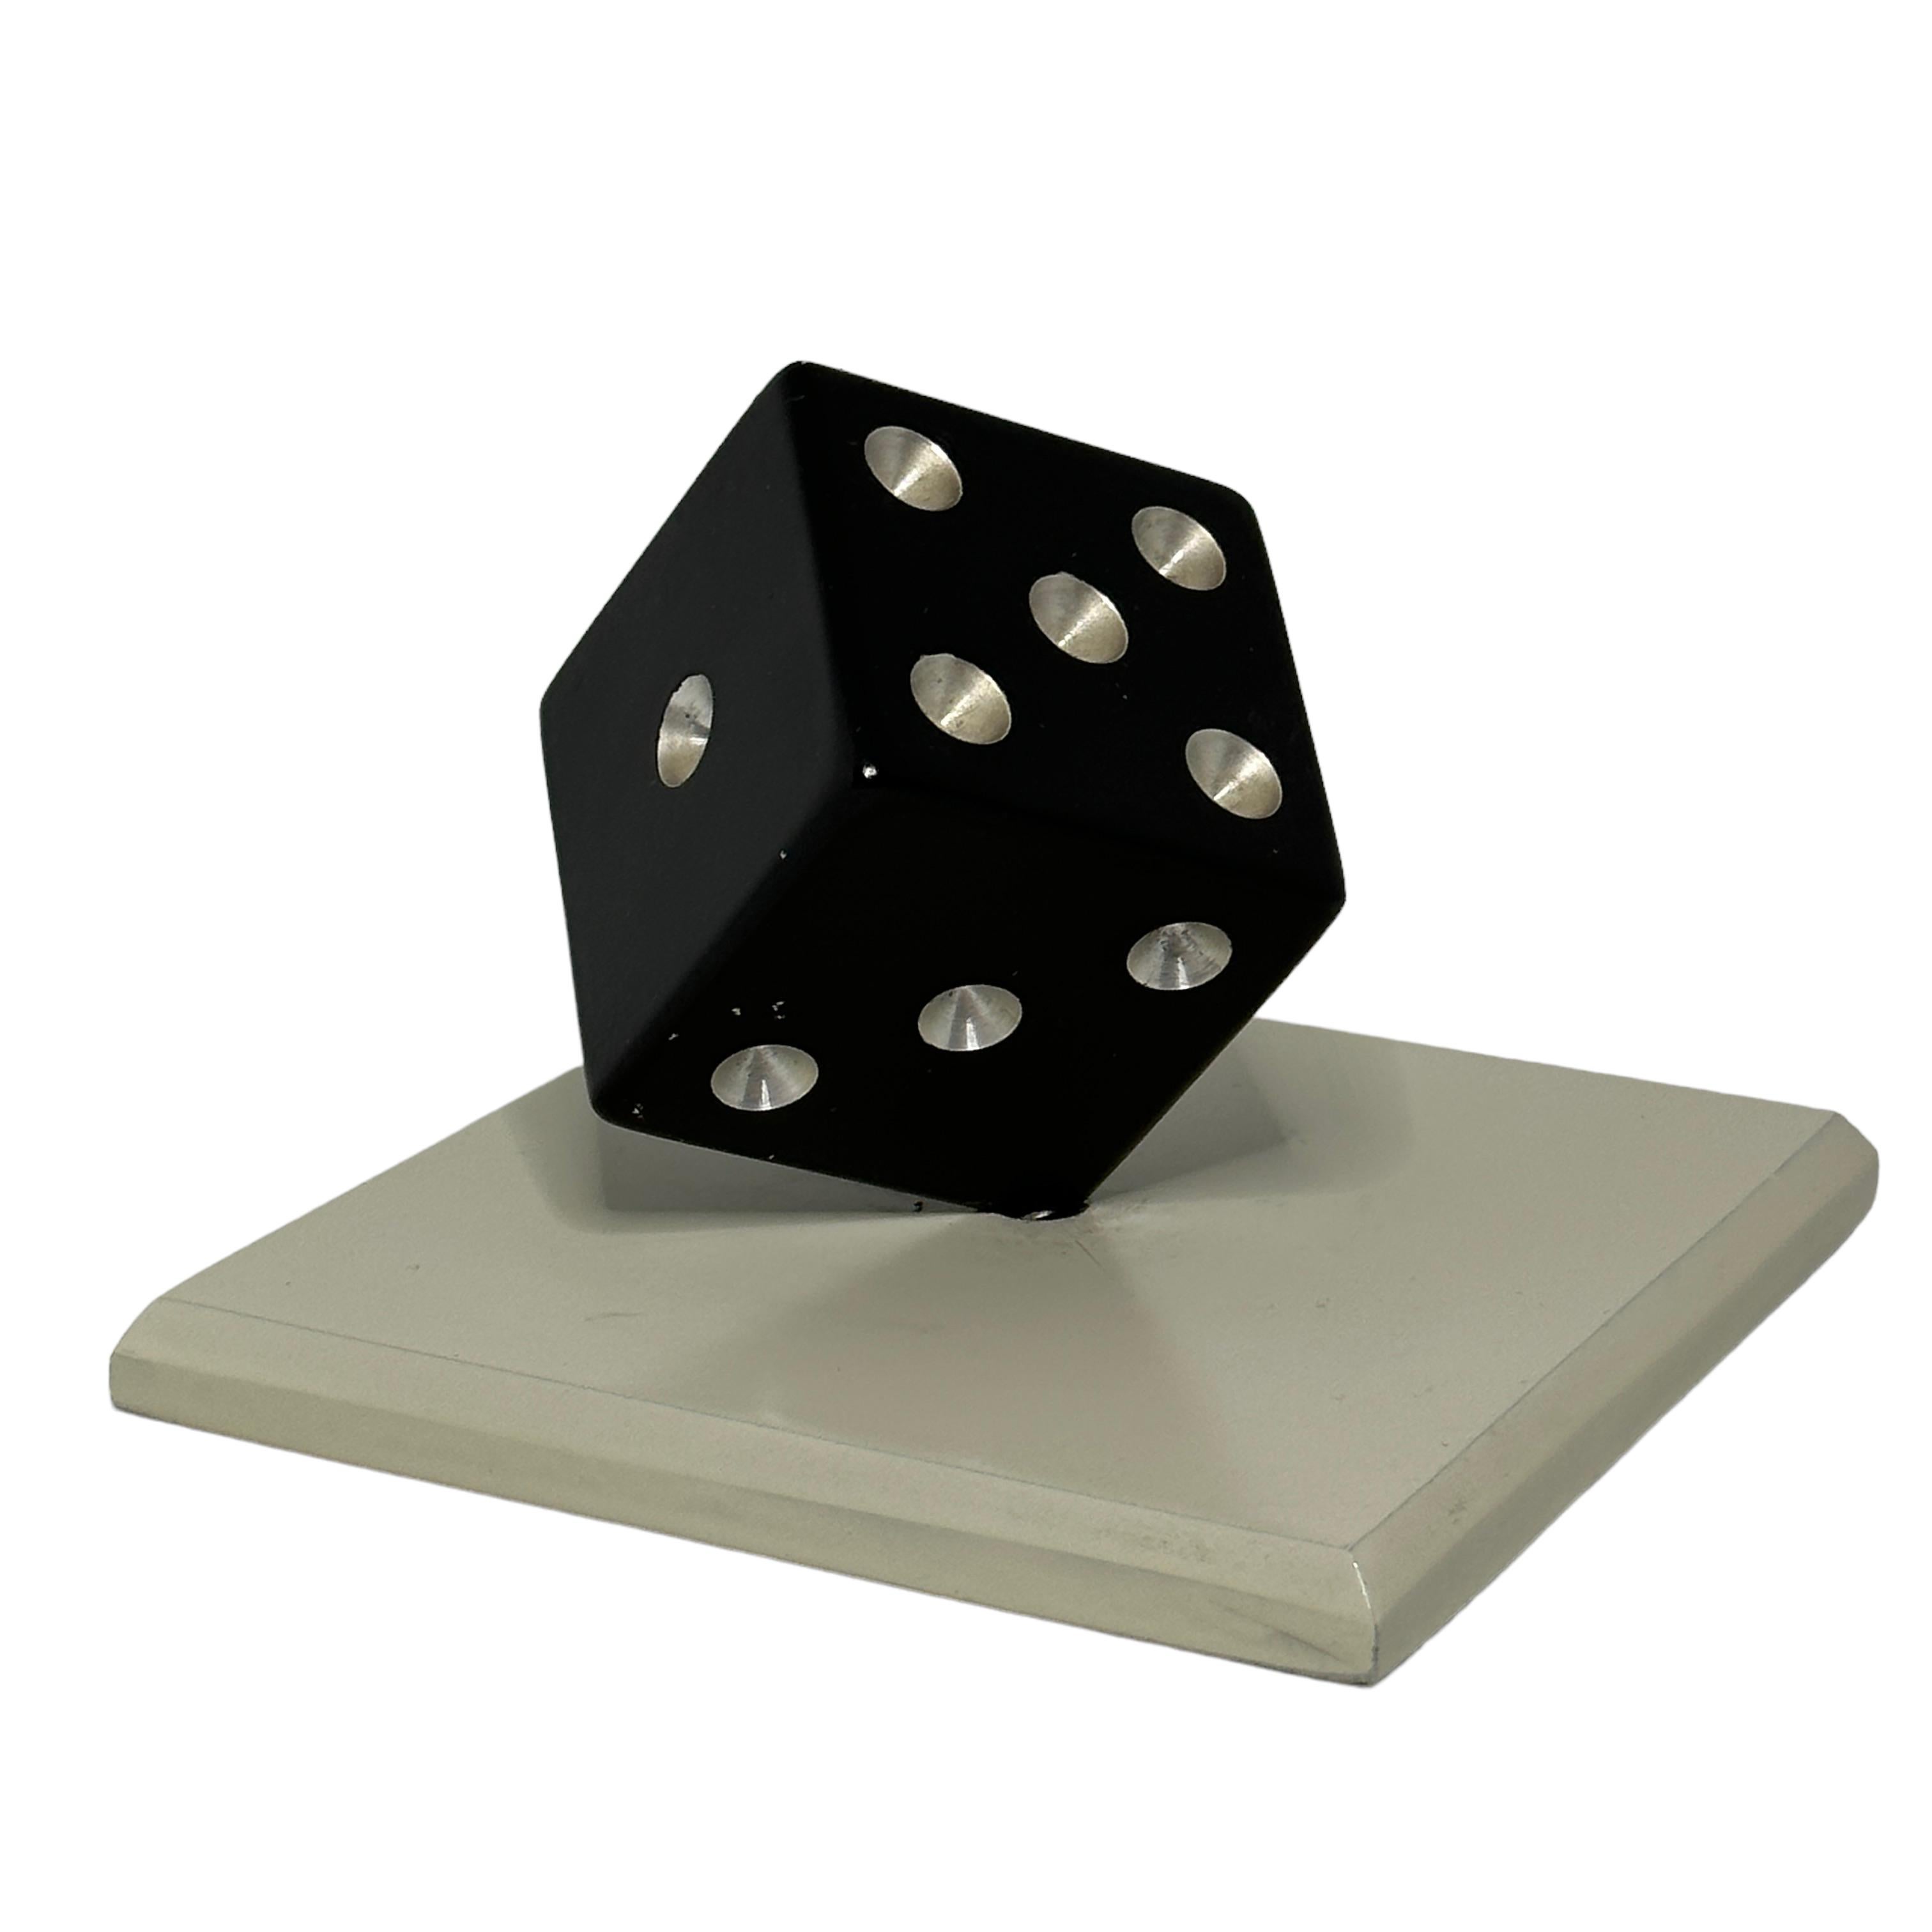 Hand-Crafted Dice Aluminum Metal Sculpture or Paper Weight Mid-Century Modern, German, 1970s For Sale